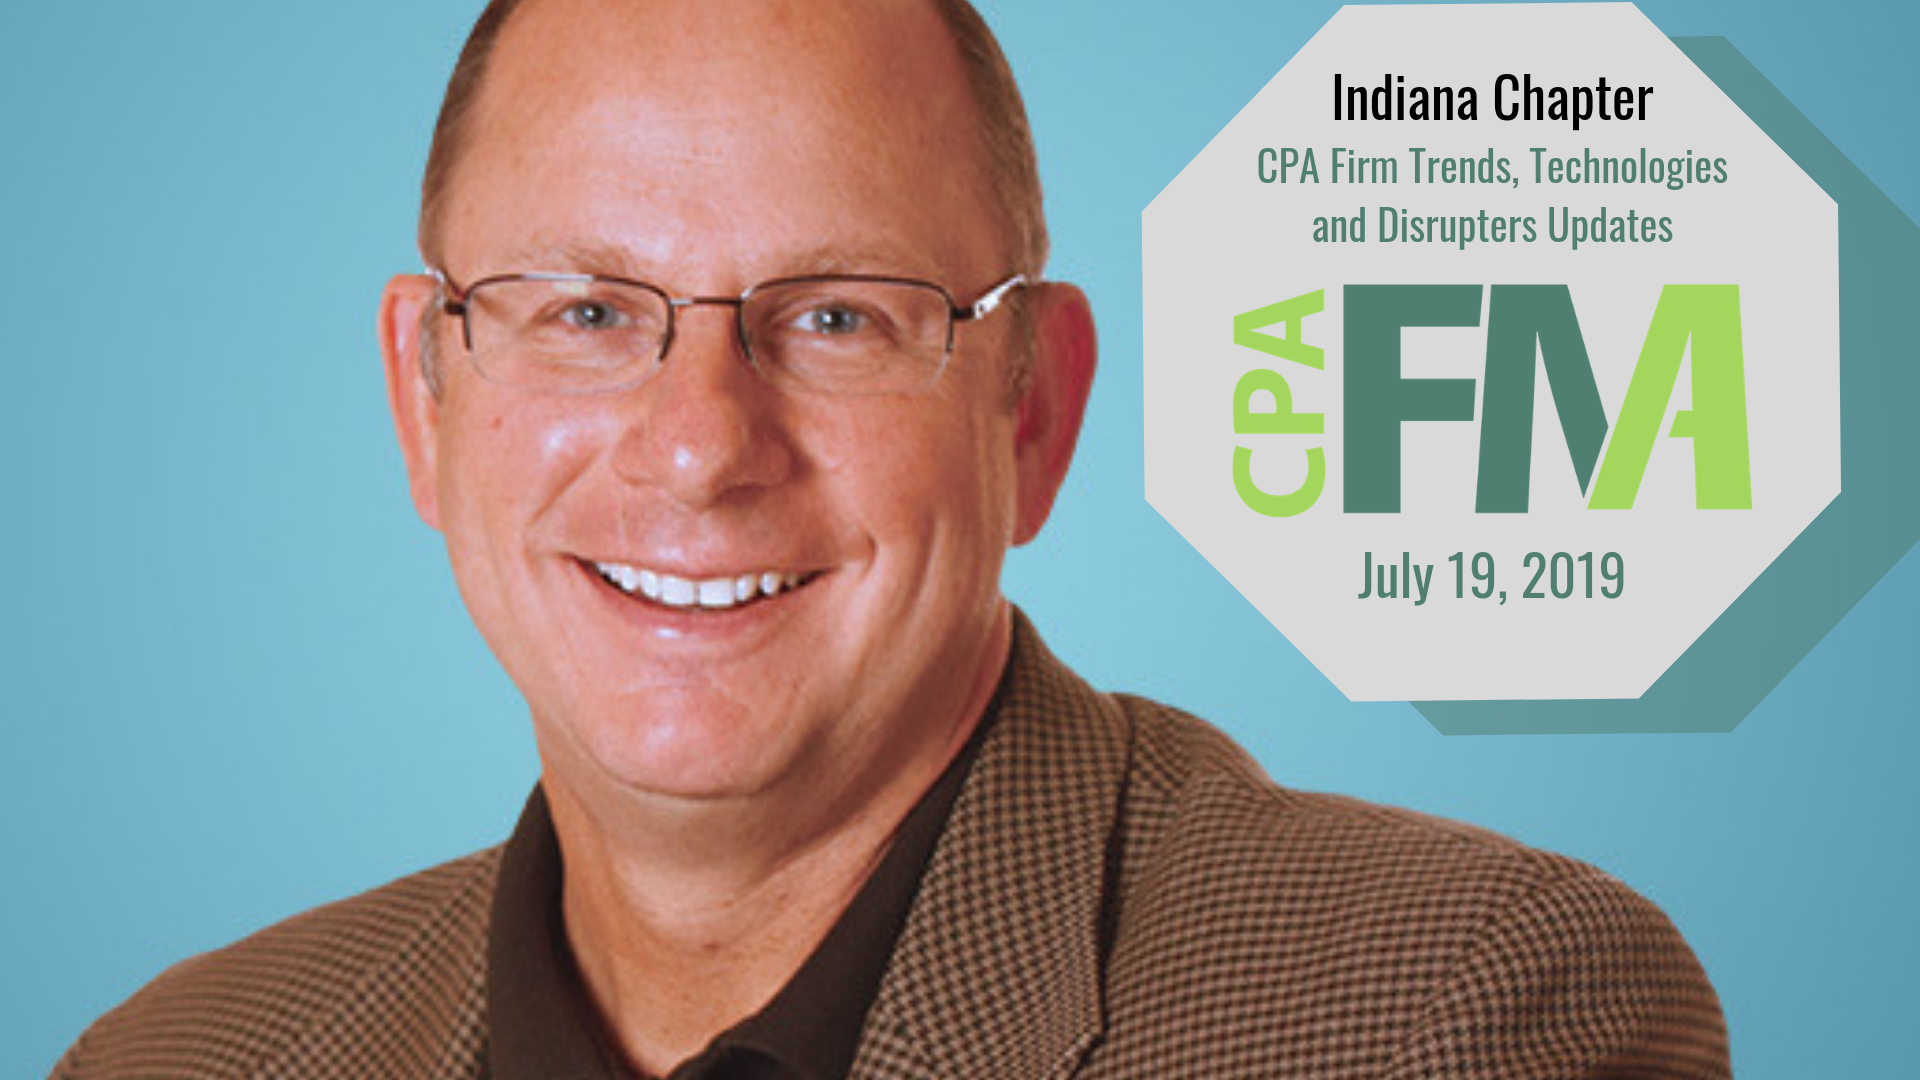 Indiana Chapter Meeting: 2019 CPA Firm Trends, Technologies an Disrupters Updates